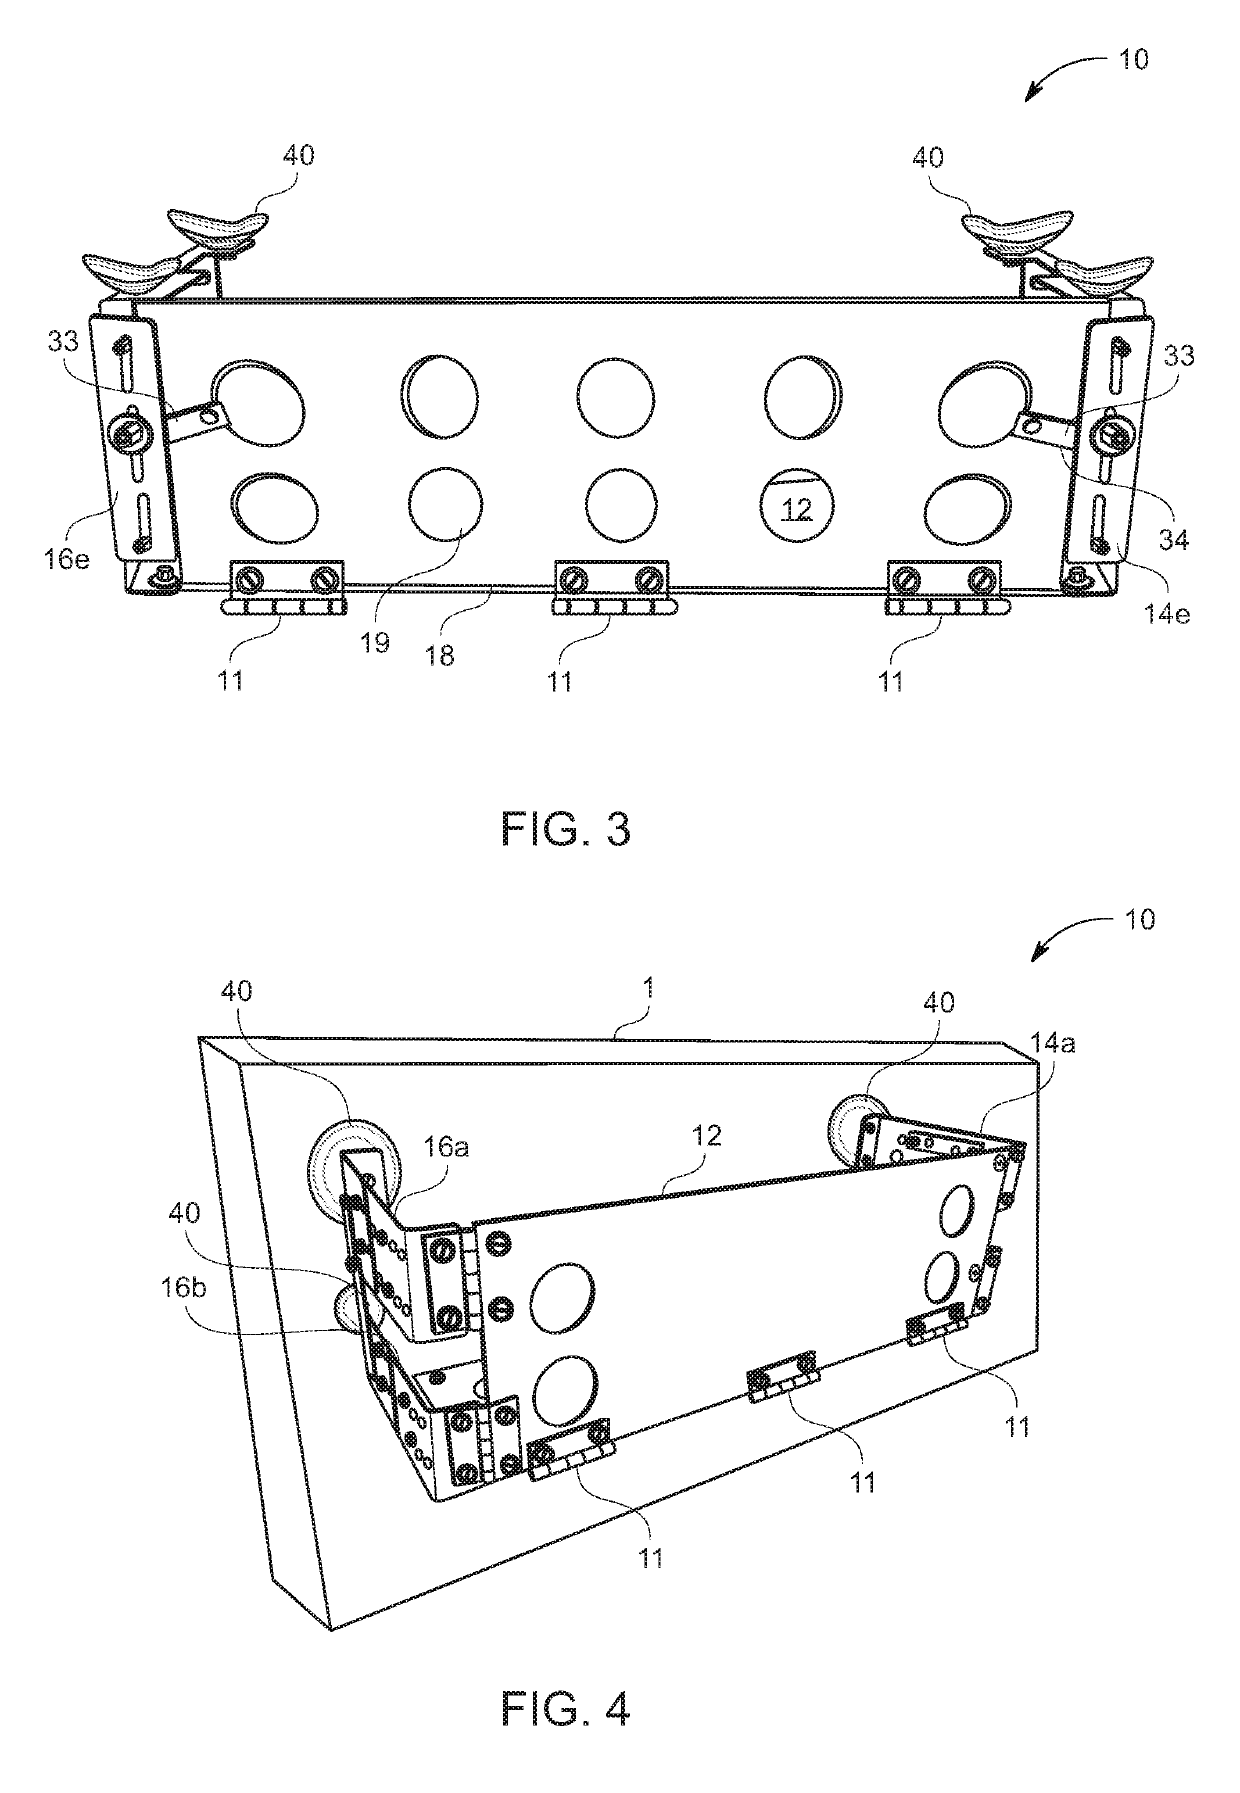 Foldable window dressing support device